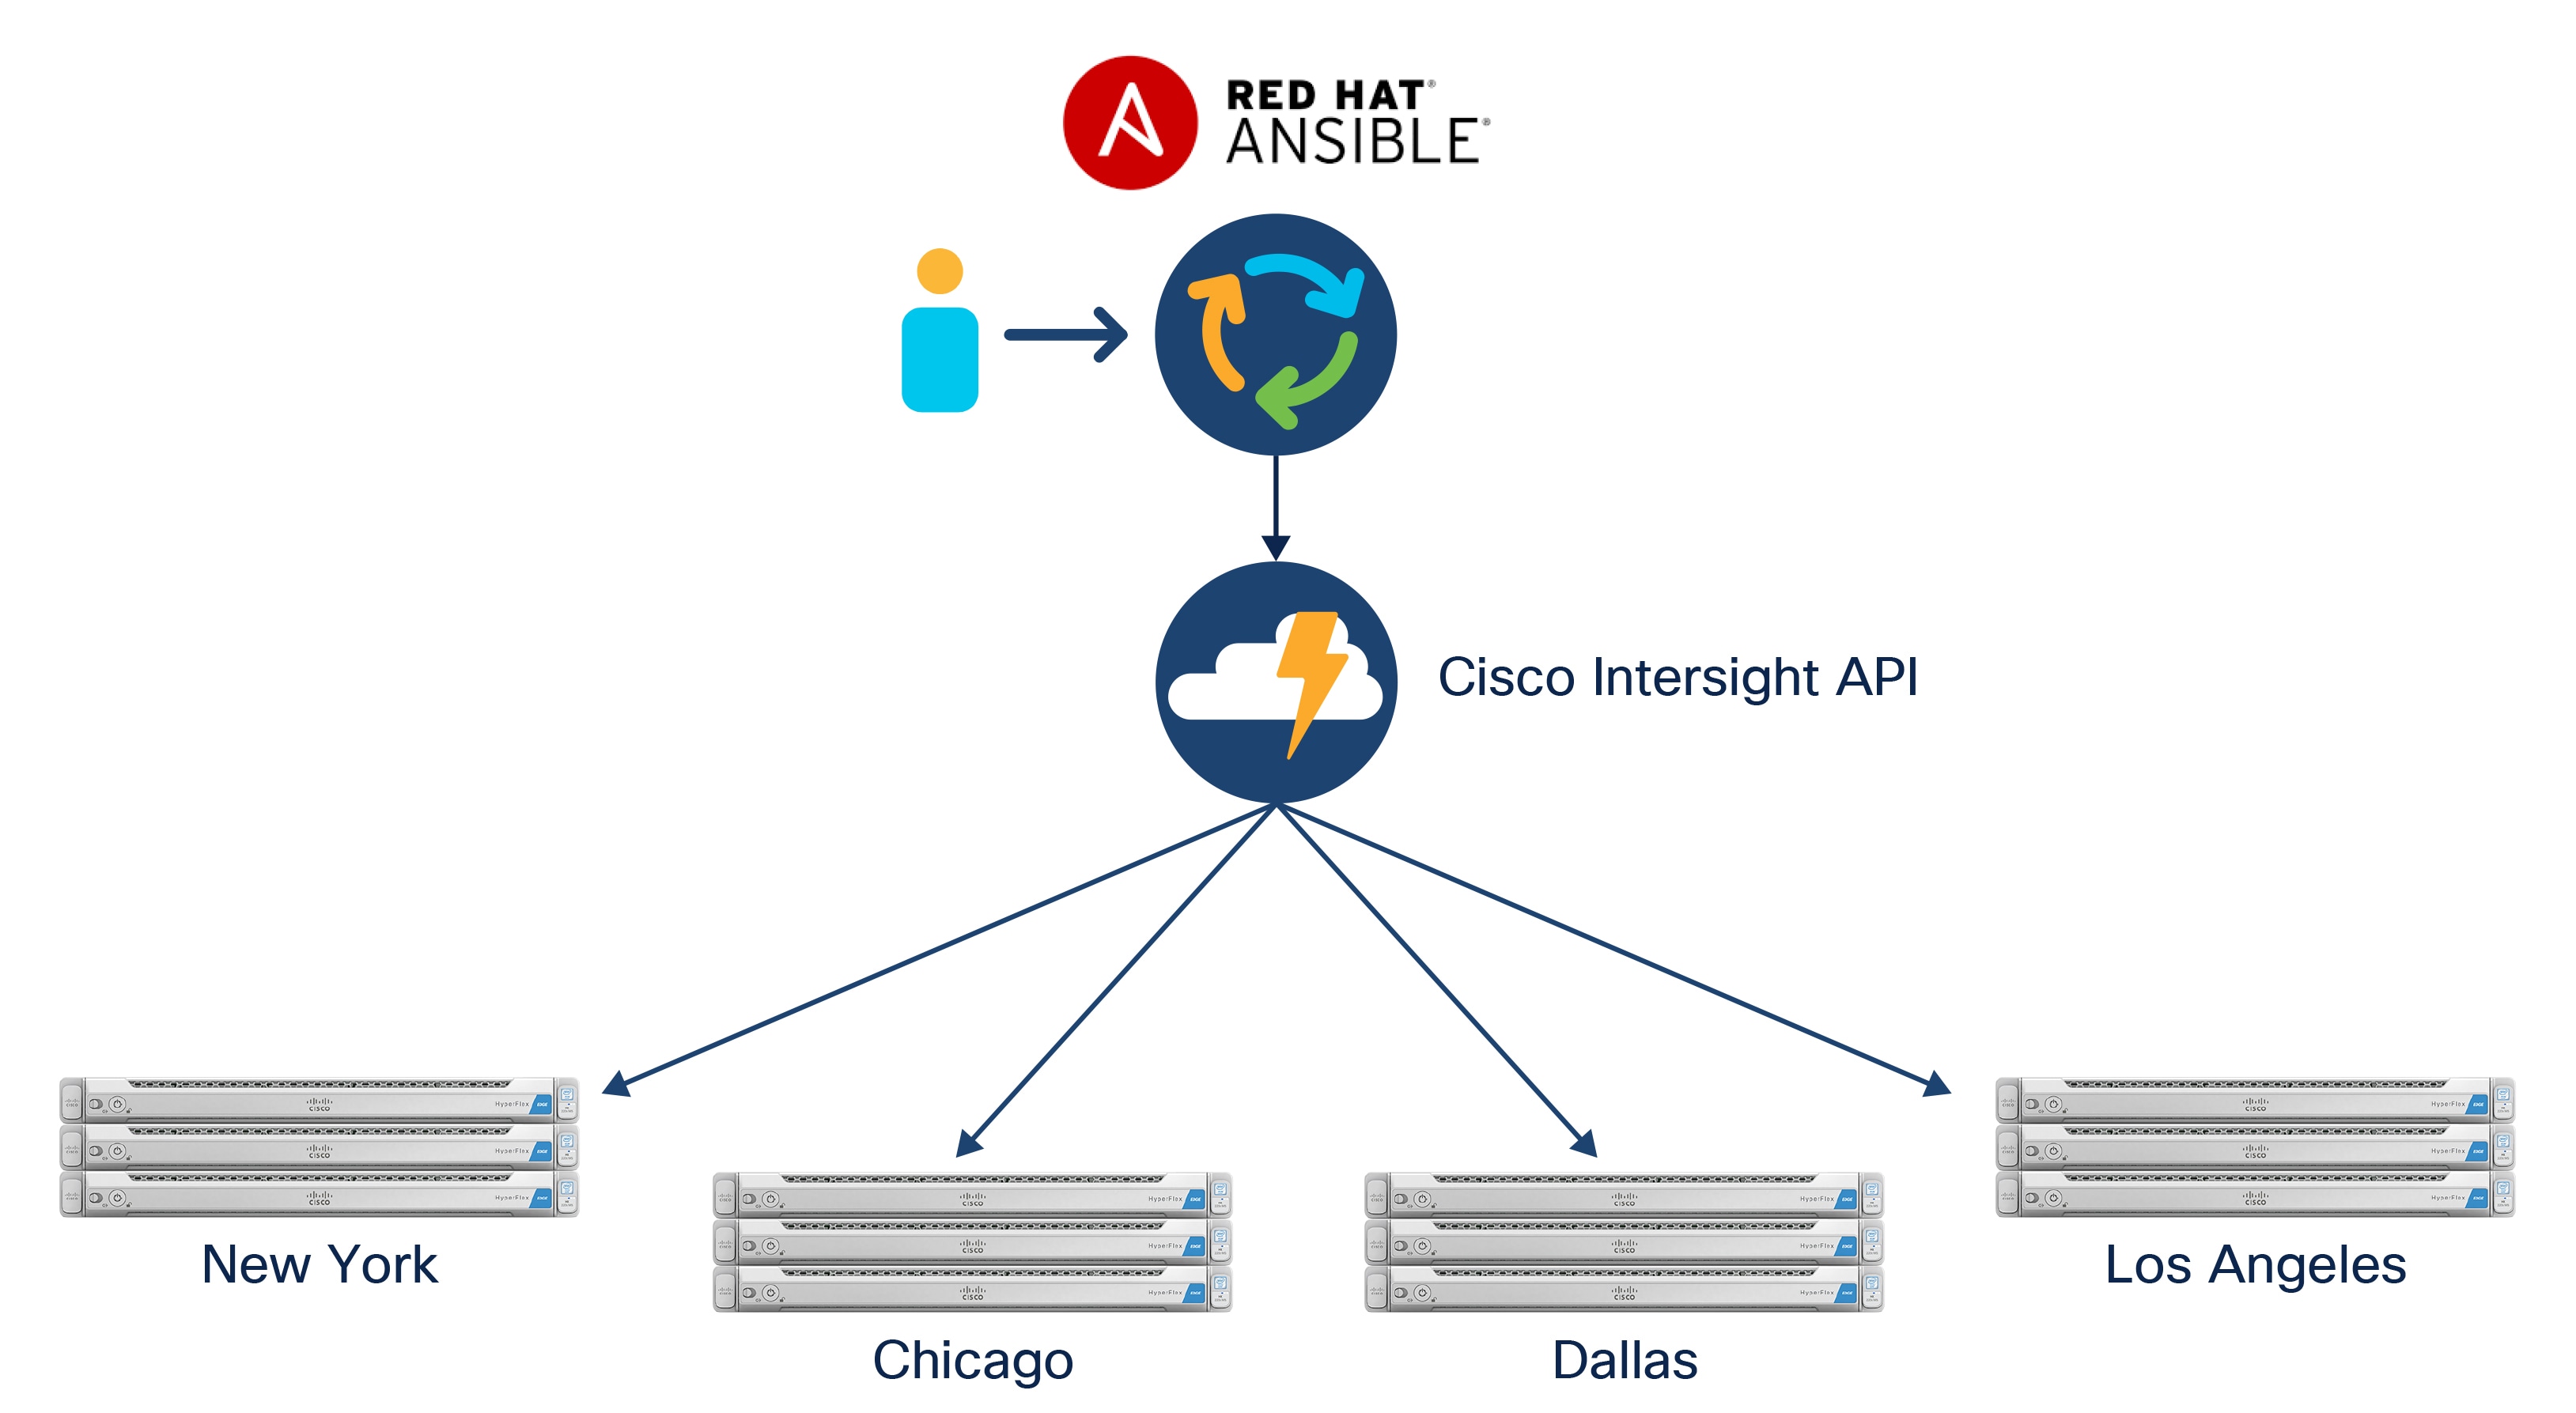 Cisco HyperFlex installation with Cisco Intersight and Red Hat Ansible -  Macintosh HD:Users:sandygraul:Documents:ETMG:Cisco:220263_Cisco:3_hyperflex-install-with-ansible:art:fig01_intersight-ansible.jpg